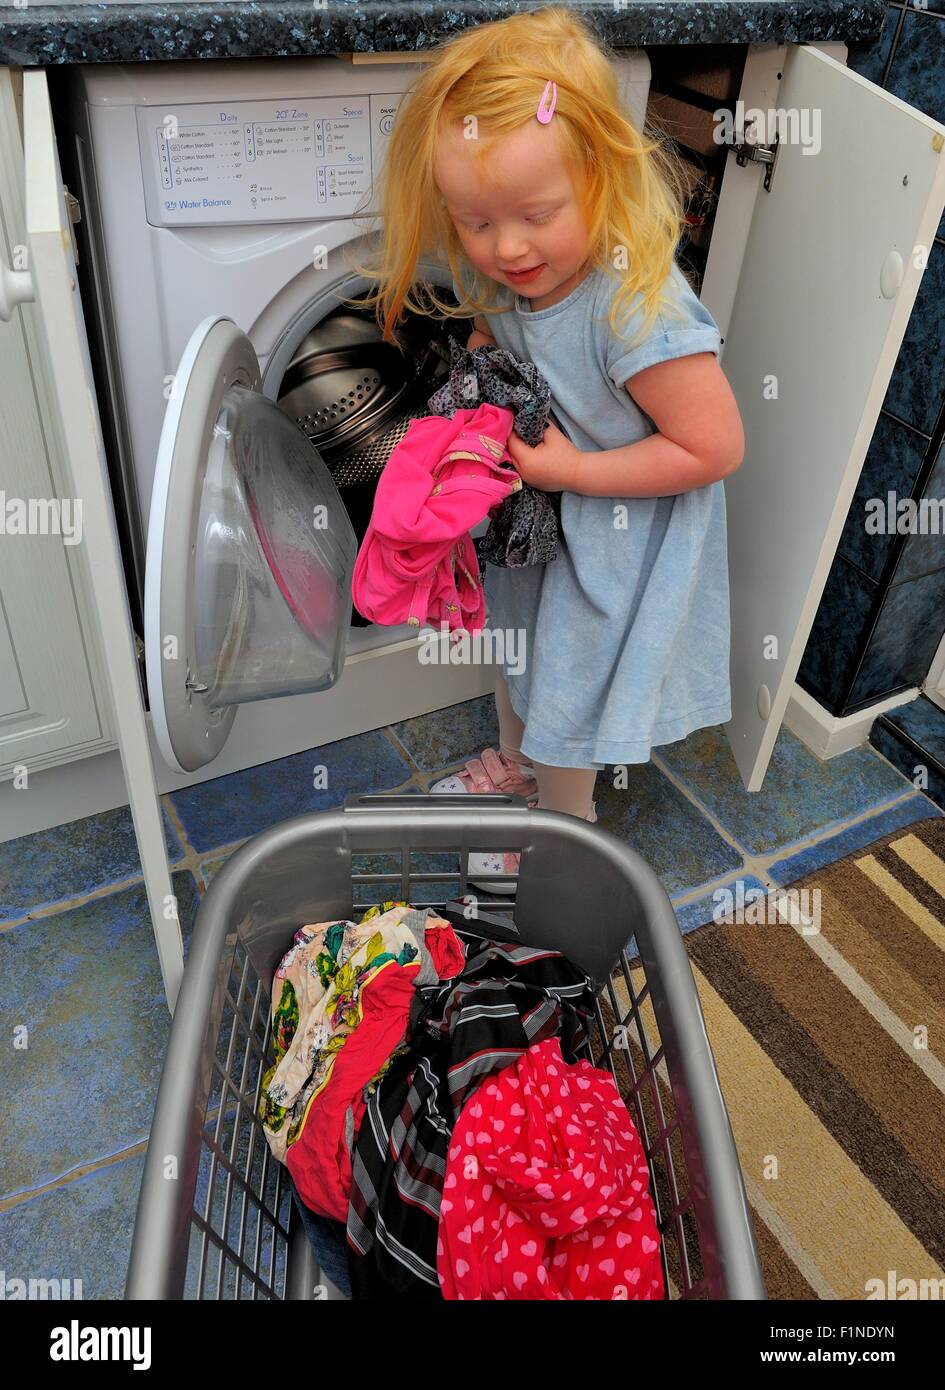 A 3 year old girl removing washing from a washing machine and loading it into a laundry basket. Stock Photo